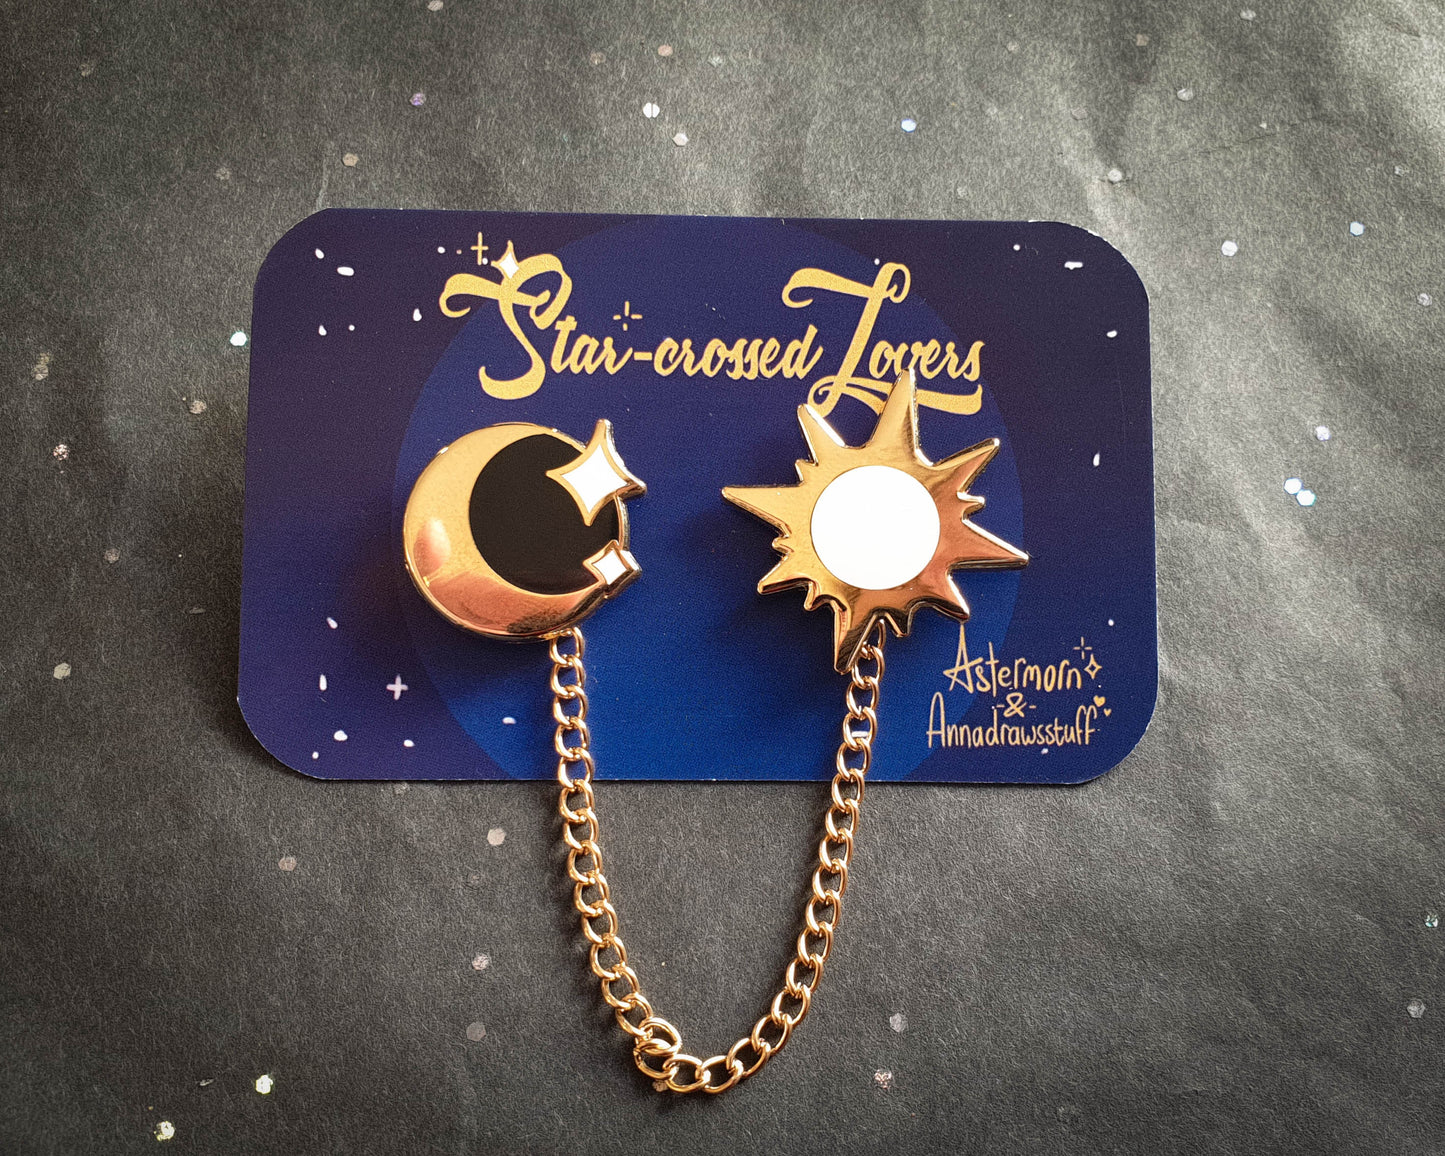 Sun And Moon Collar Pins - Hard Enamel Pin Set - Star-crossed Lovers (Collaboration by Astermorn and Annadrawsstuff)